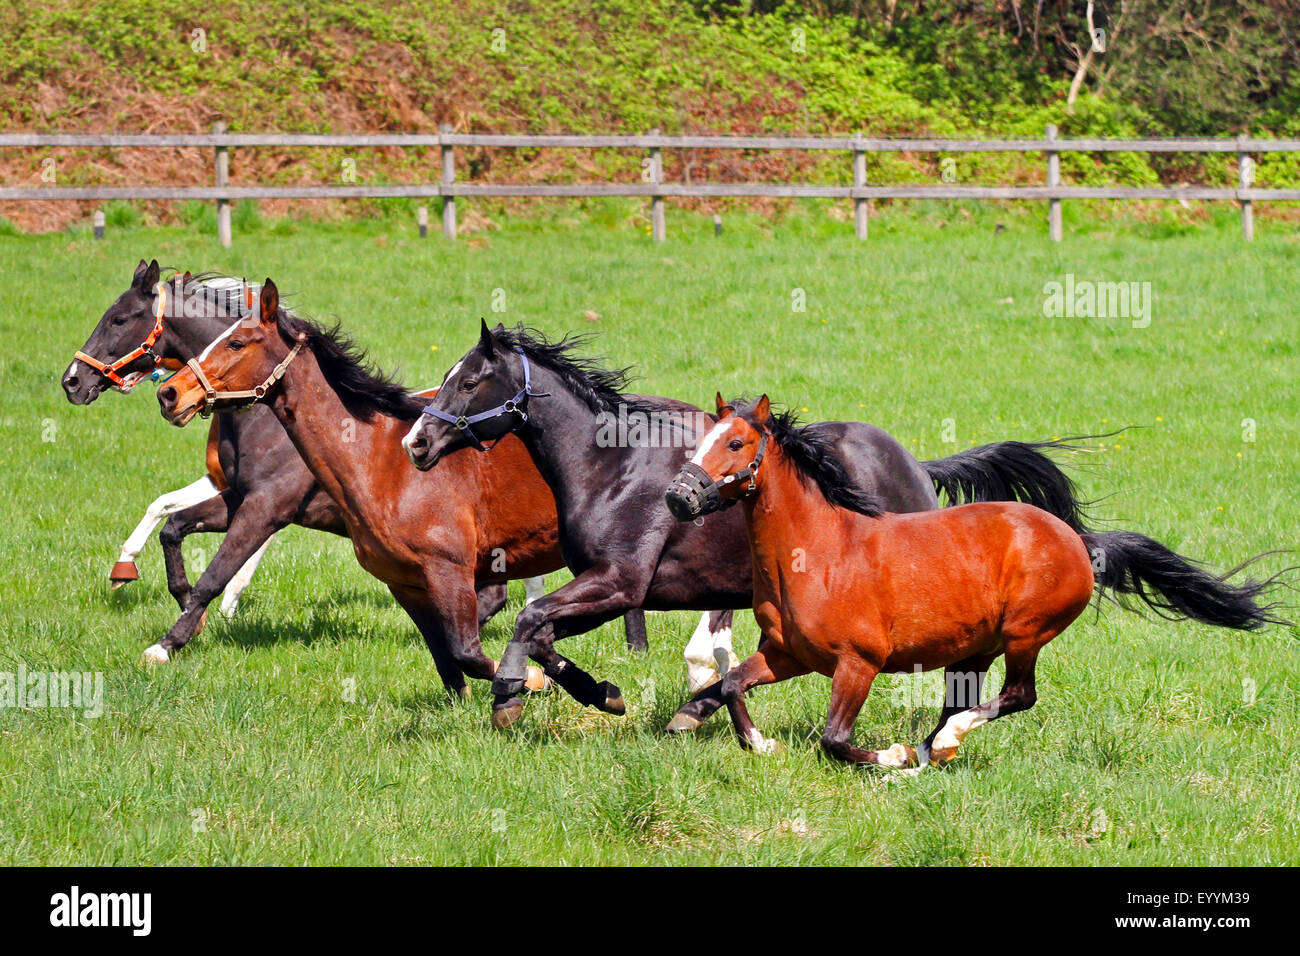 domestic horse (Equus przewalskii f. caballus), galloping horses at their first time in paddock after the winter, Germany Stock Photo